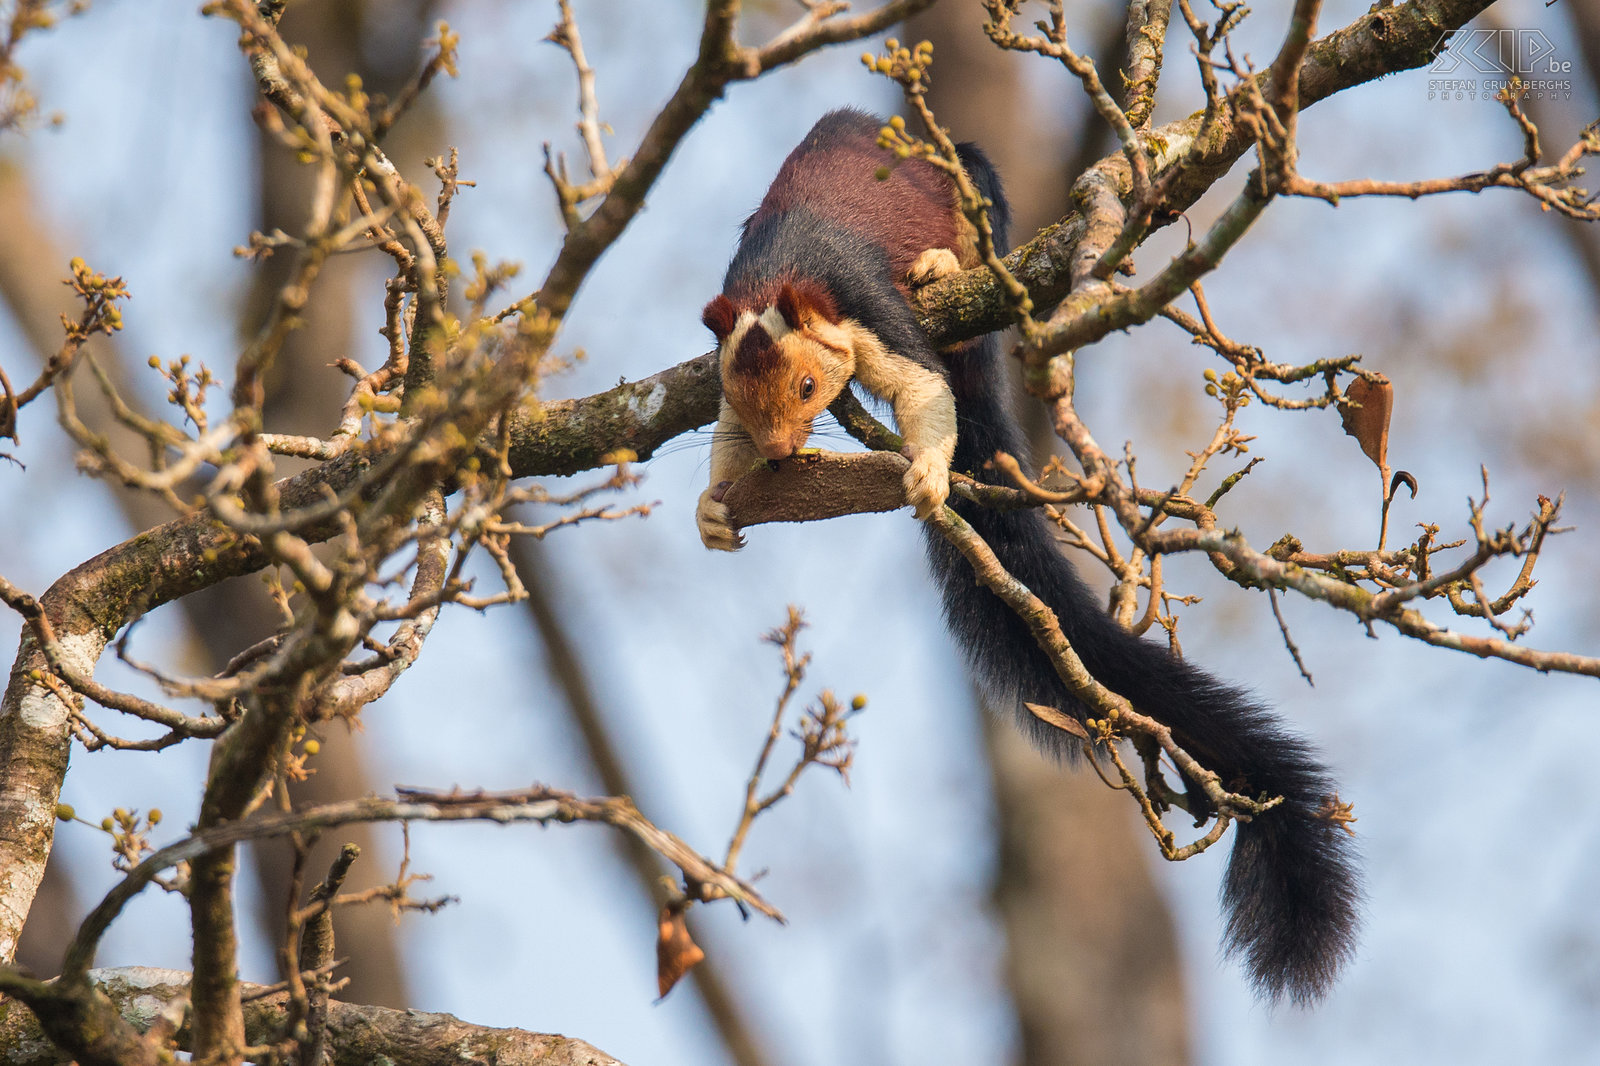 Thattekad - Indian giant squirrel The Indian giant squirrel or Malabar giant squirrel (Ratufa indica) is a large but cute squirrel that lives in south India. Their body length varies around 36cm and the tail length is approximately 0.6m. Stefan Cruysberghs